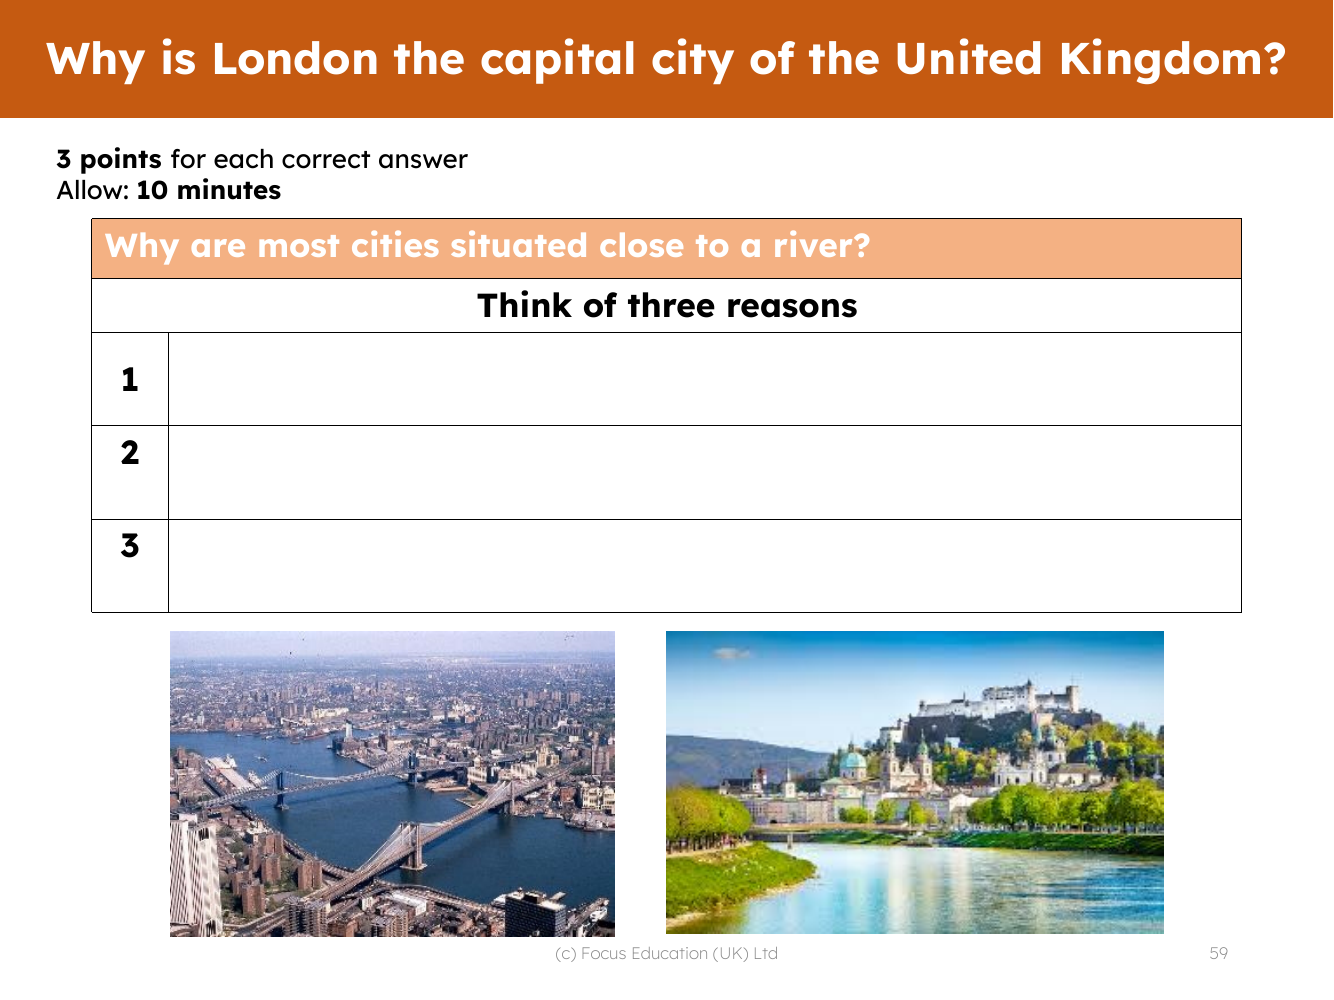 Three reasons - Why cities are situated close to rivers